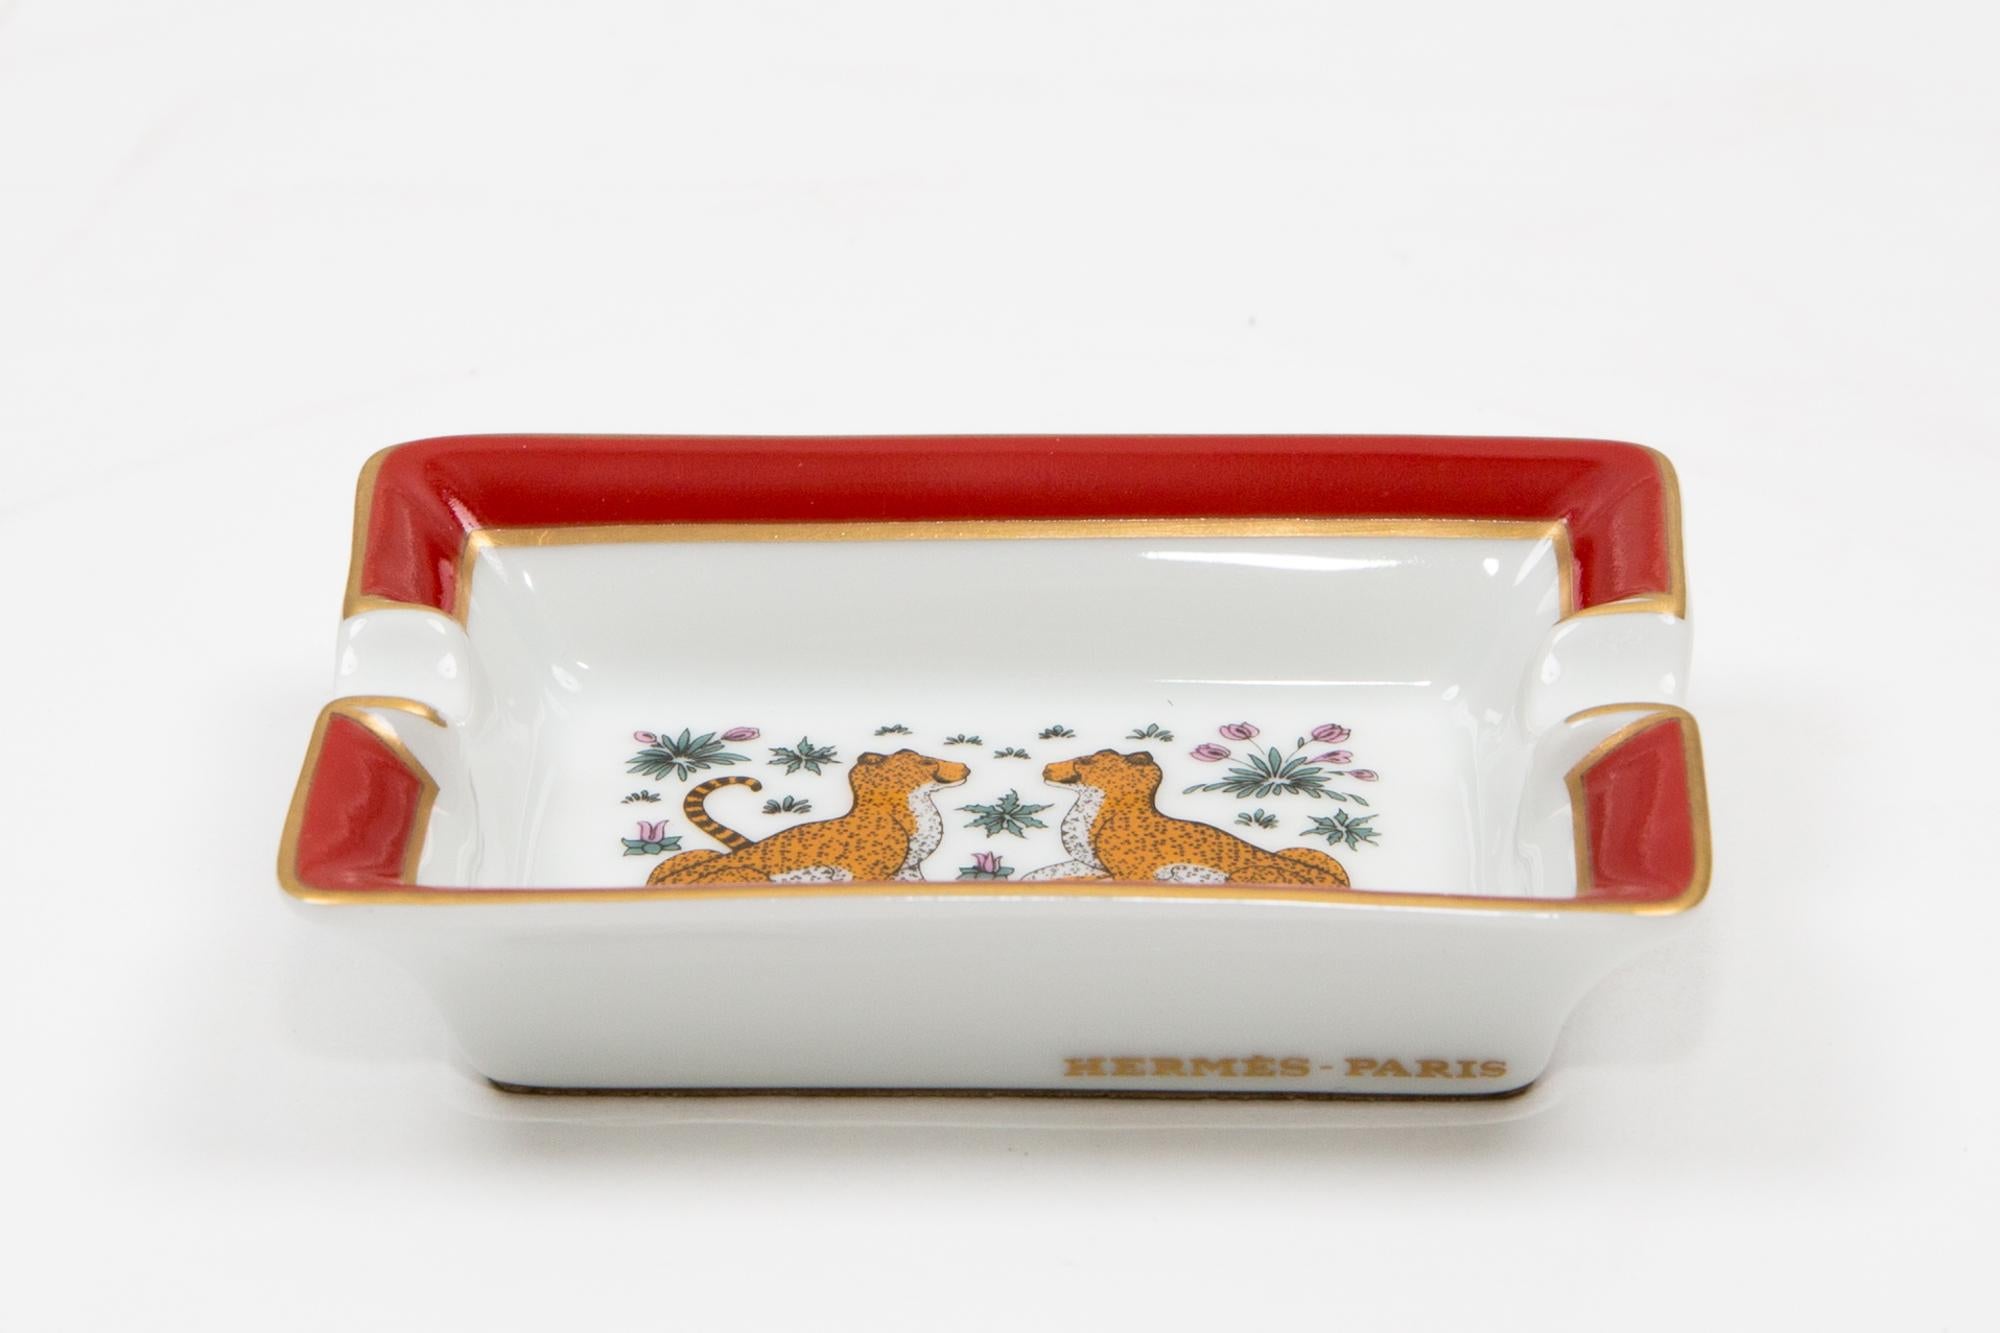 Hermes Leopard Porcelain Small Size Ashtray or Organizer For Sale 2